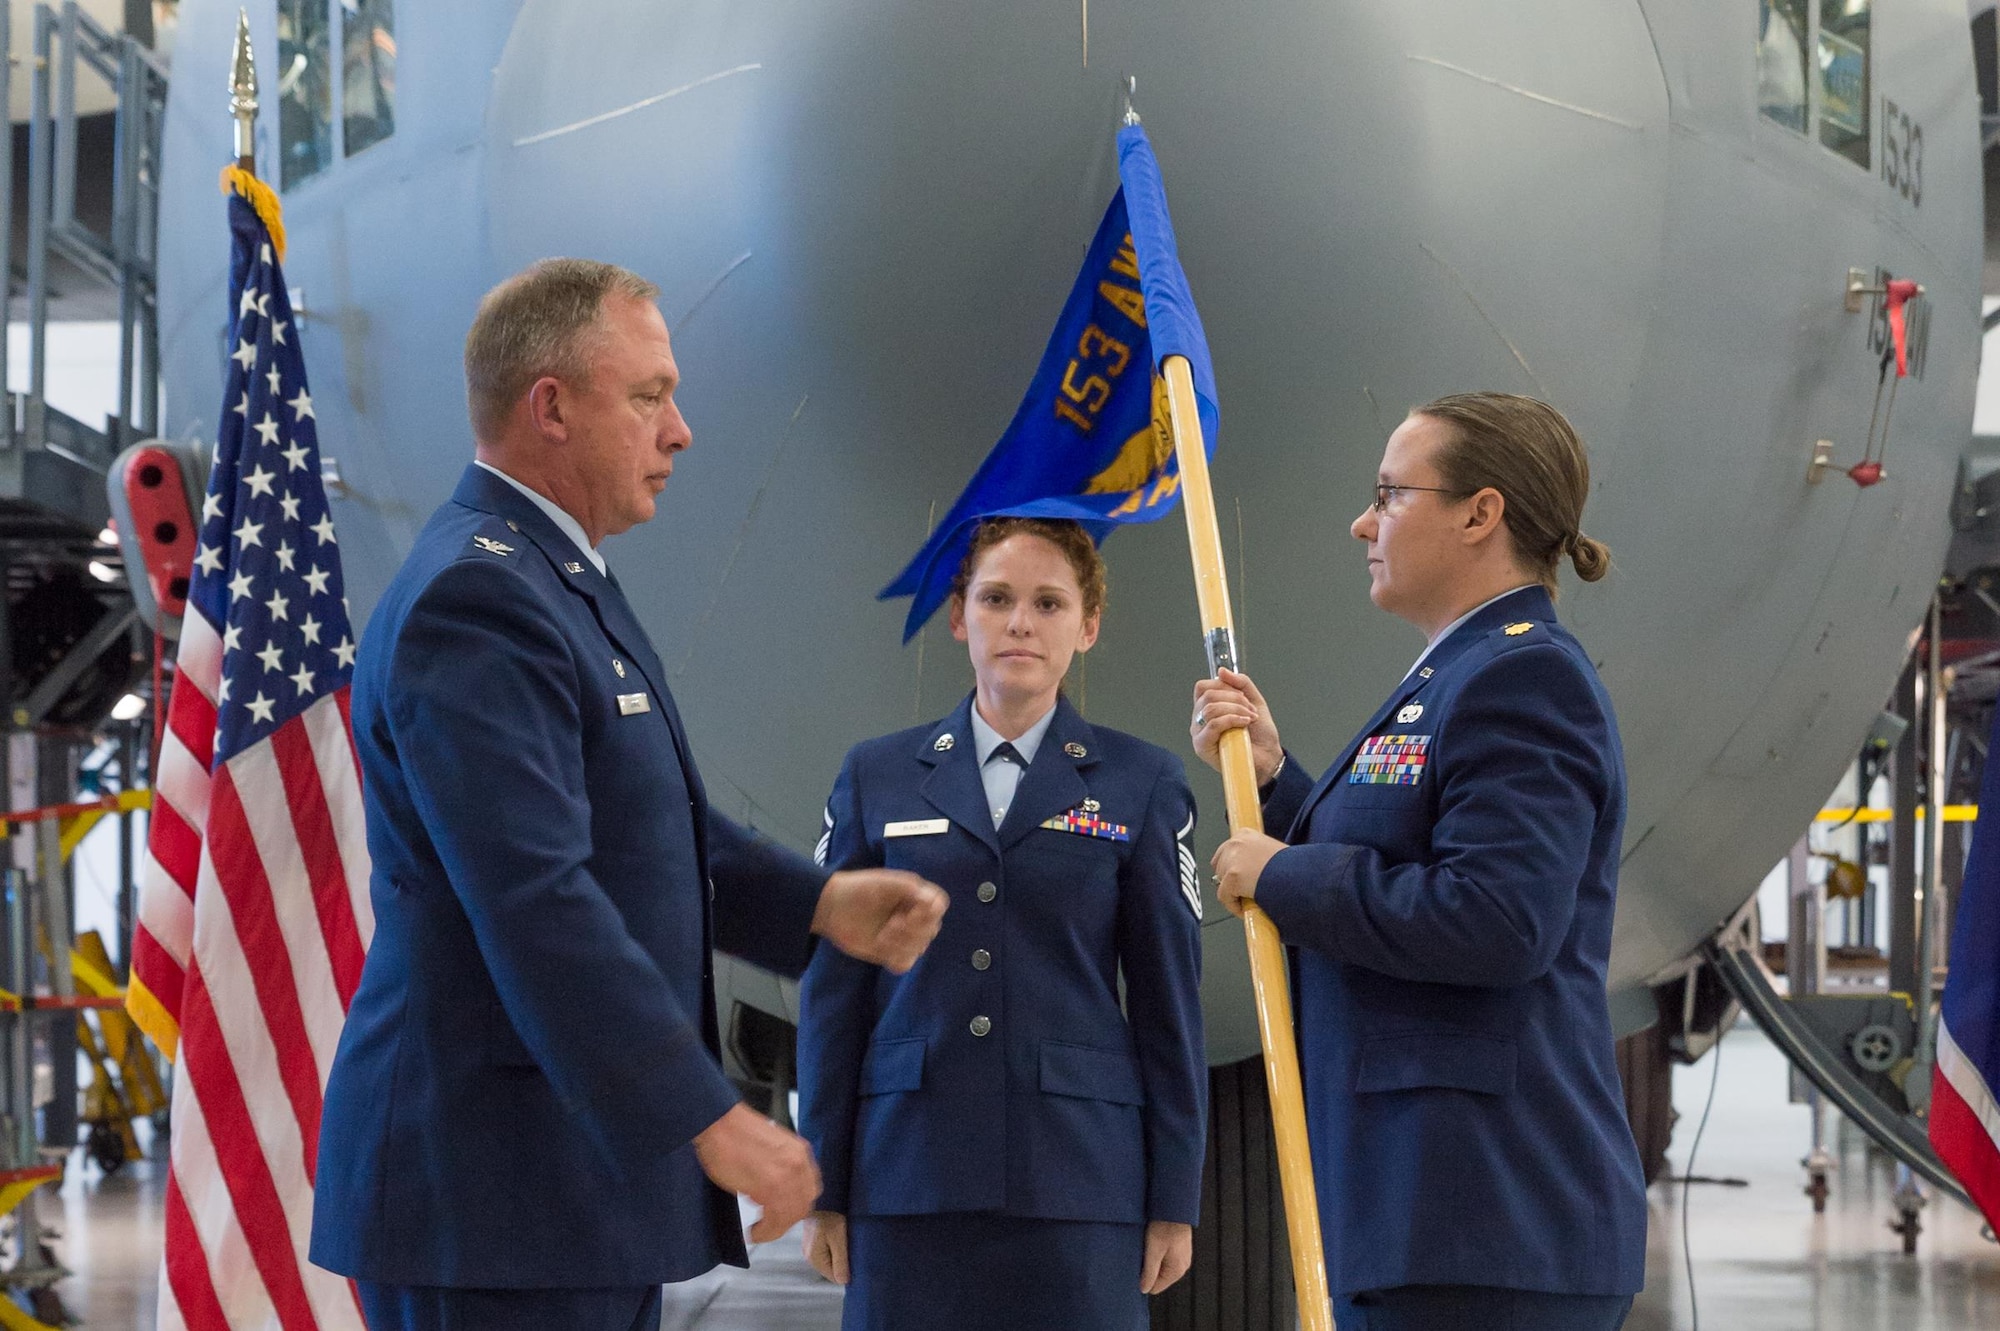 U.S. Air Force Col. Pete Linde, 153rd Maintenance Group commander, passes the 153rd Aircraft Maintenance Squadron guidon to Maj. Elizabeth Evans during an assumption of command ceremony June 10, 2017 in Cheyenne, Wyoming. Evans previously held the position of 153rd Maintenance Operations Flight commander.